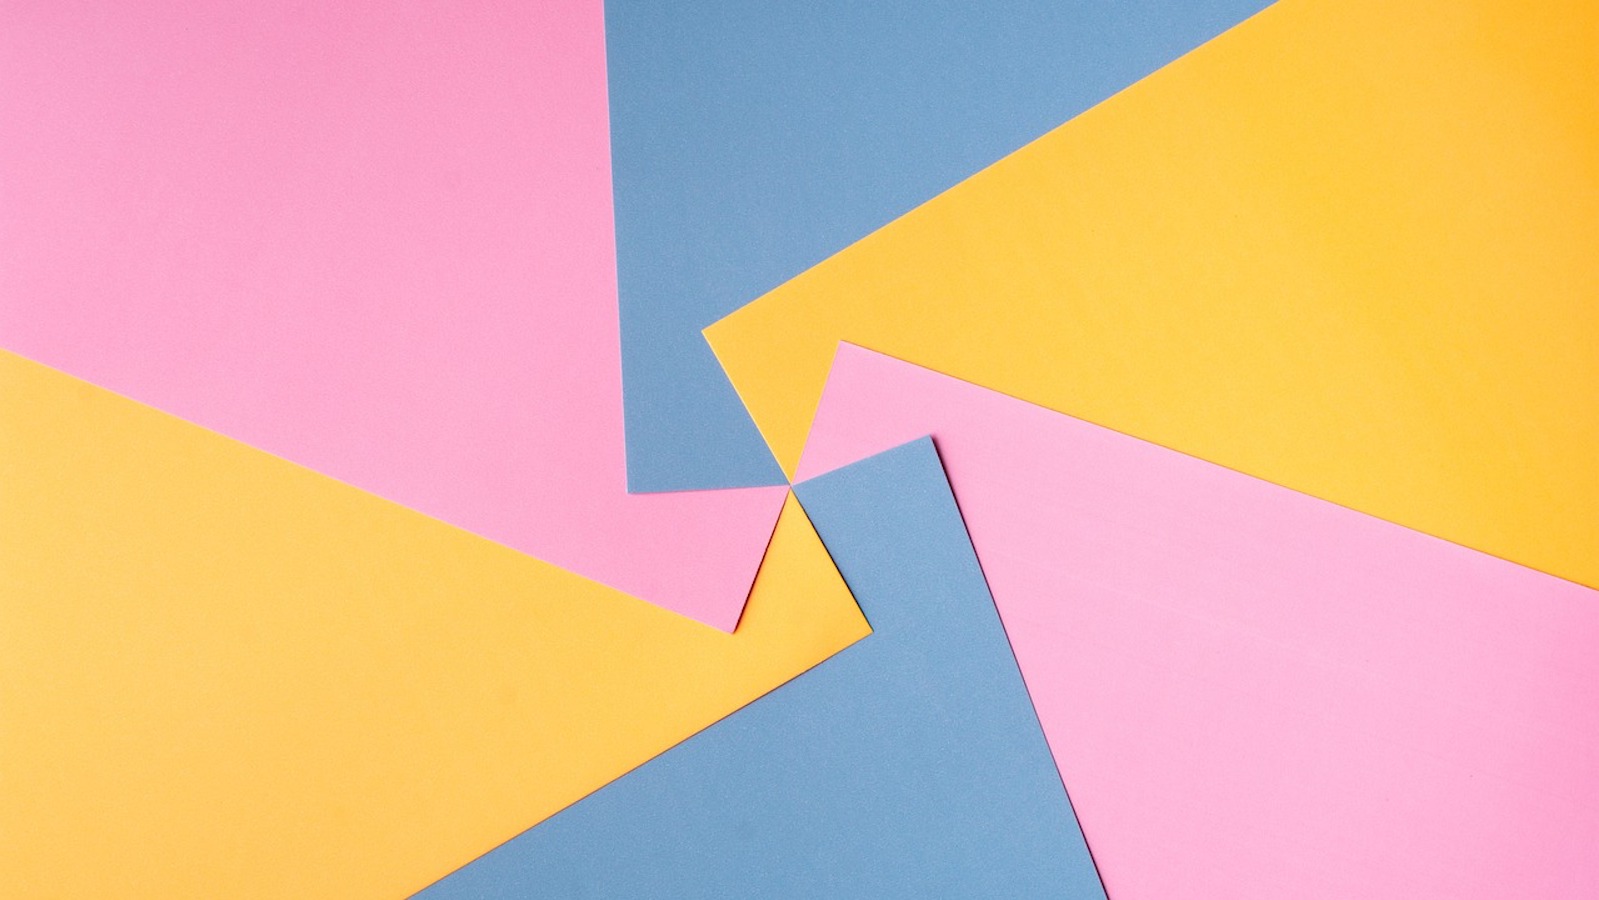 Blue, yellow, and pink pieces of paper swirled